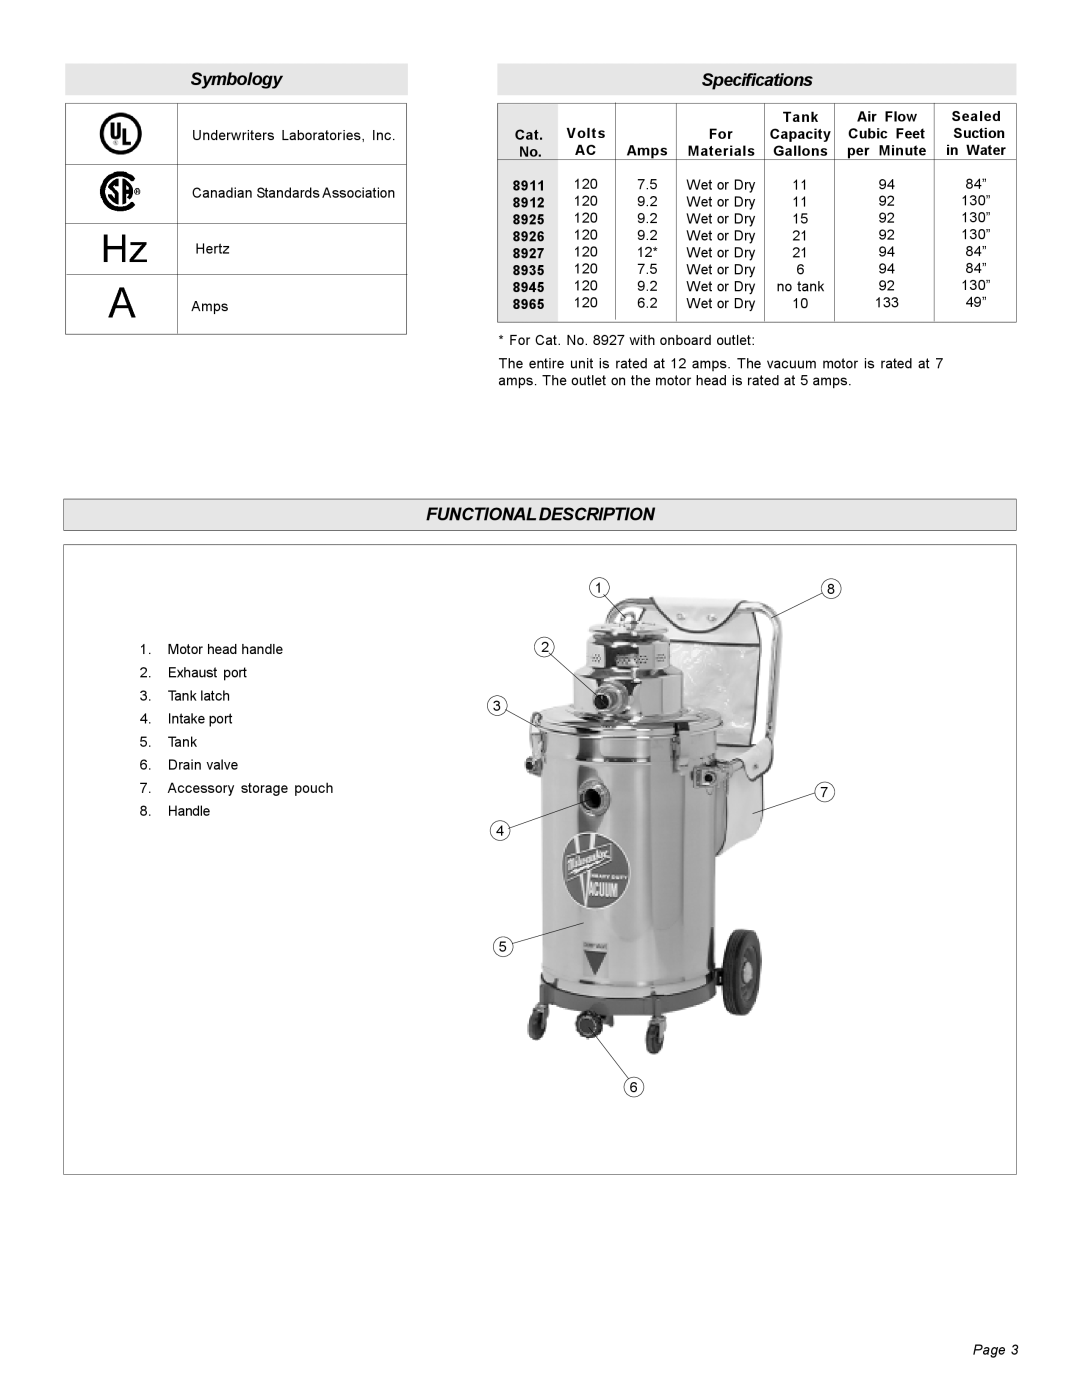 Milwaukee Heavy-Duty Commercial Vacuum manual Symbology, Specifications, Functionaldescription, Page 